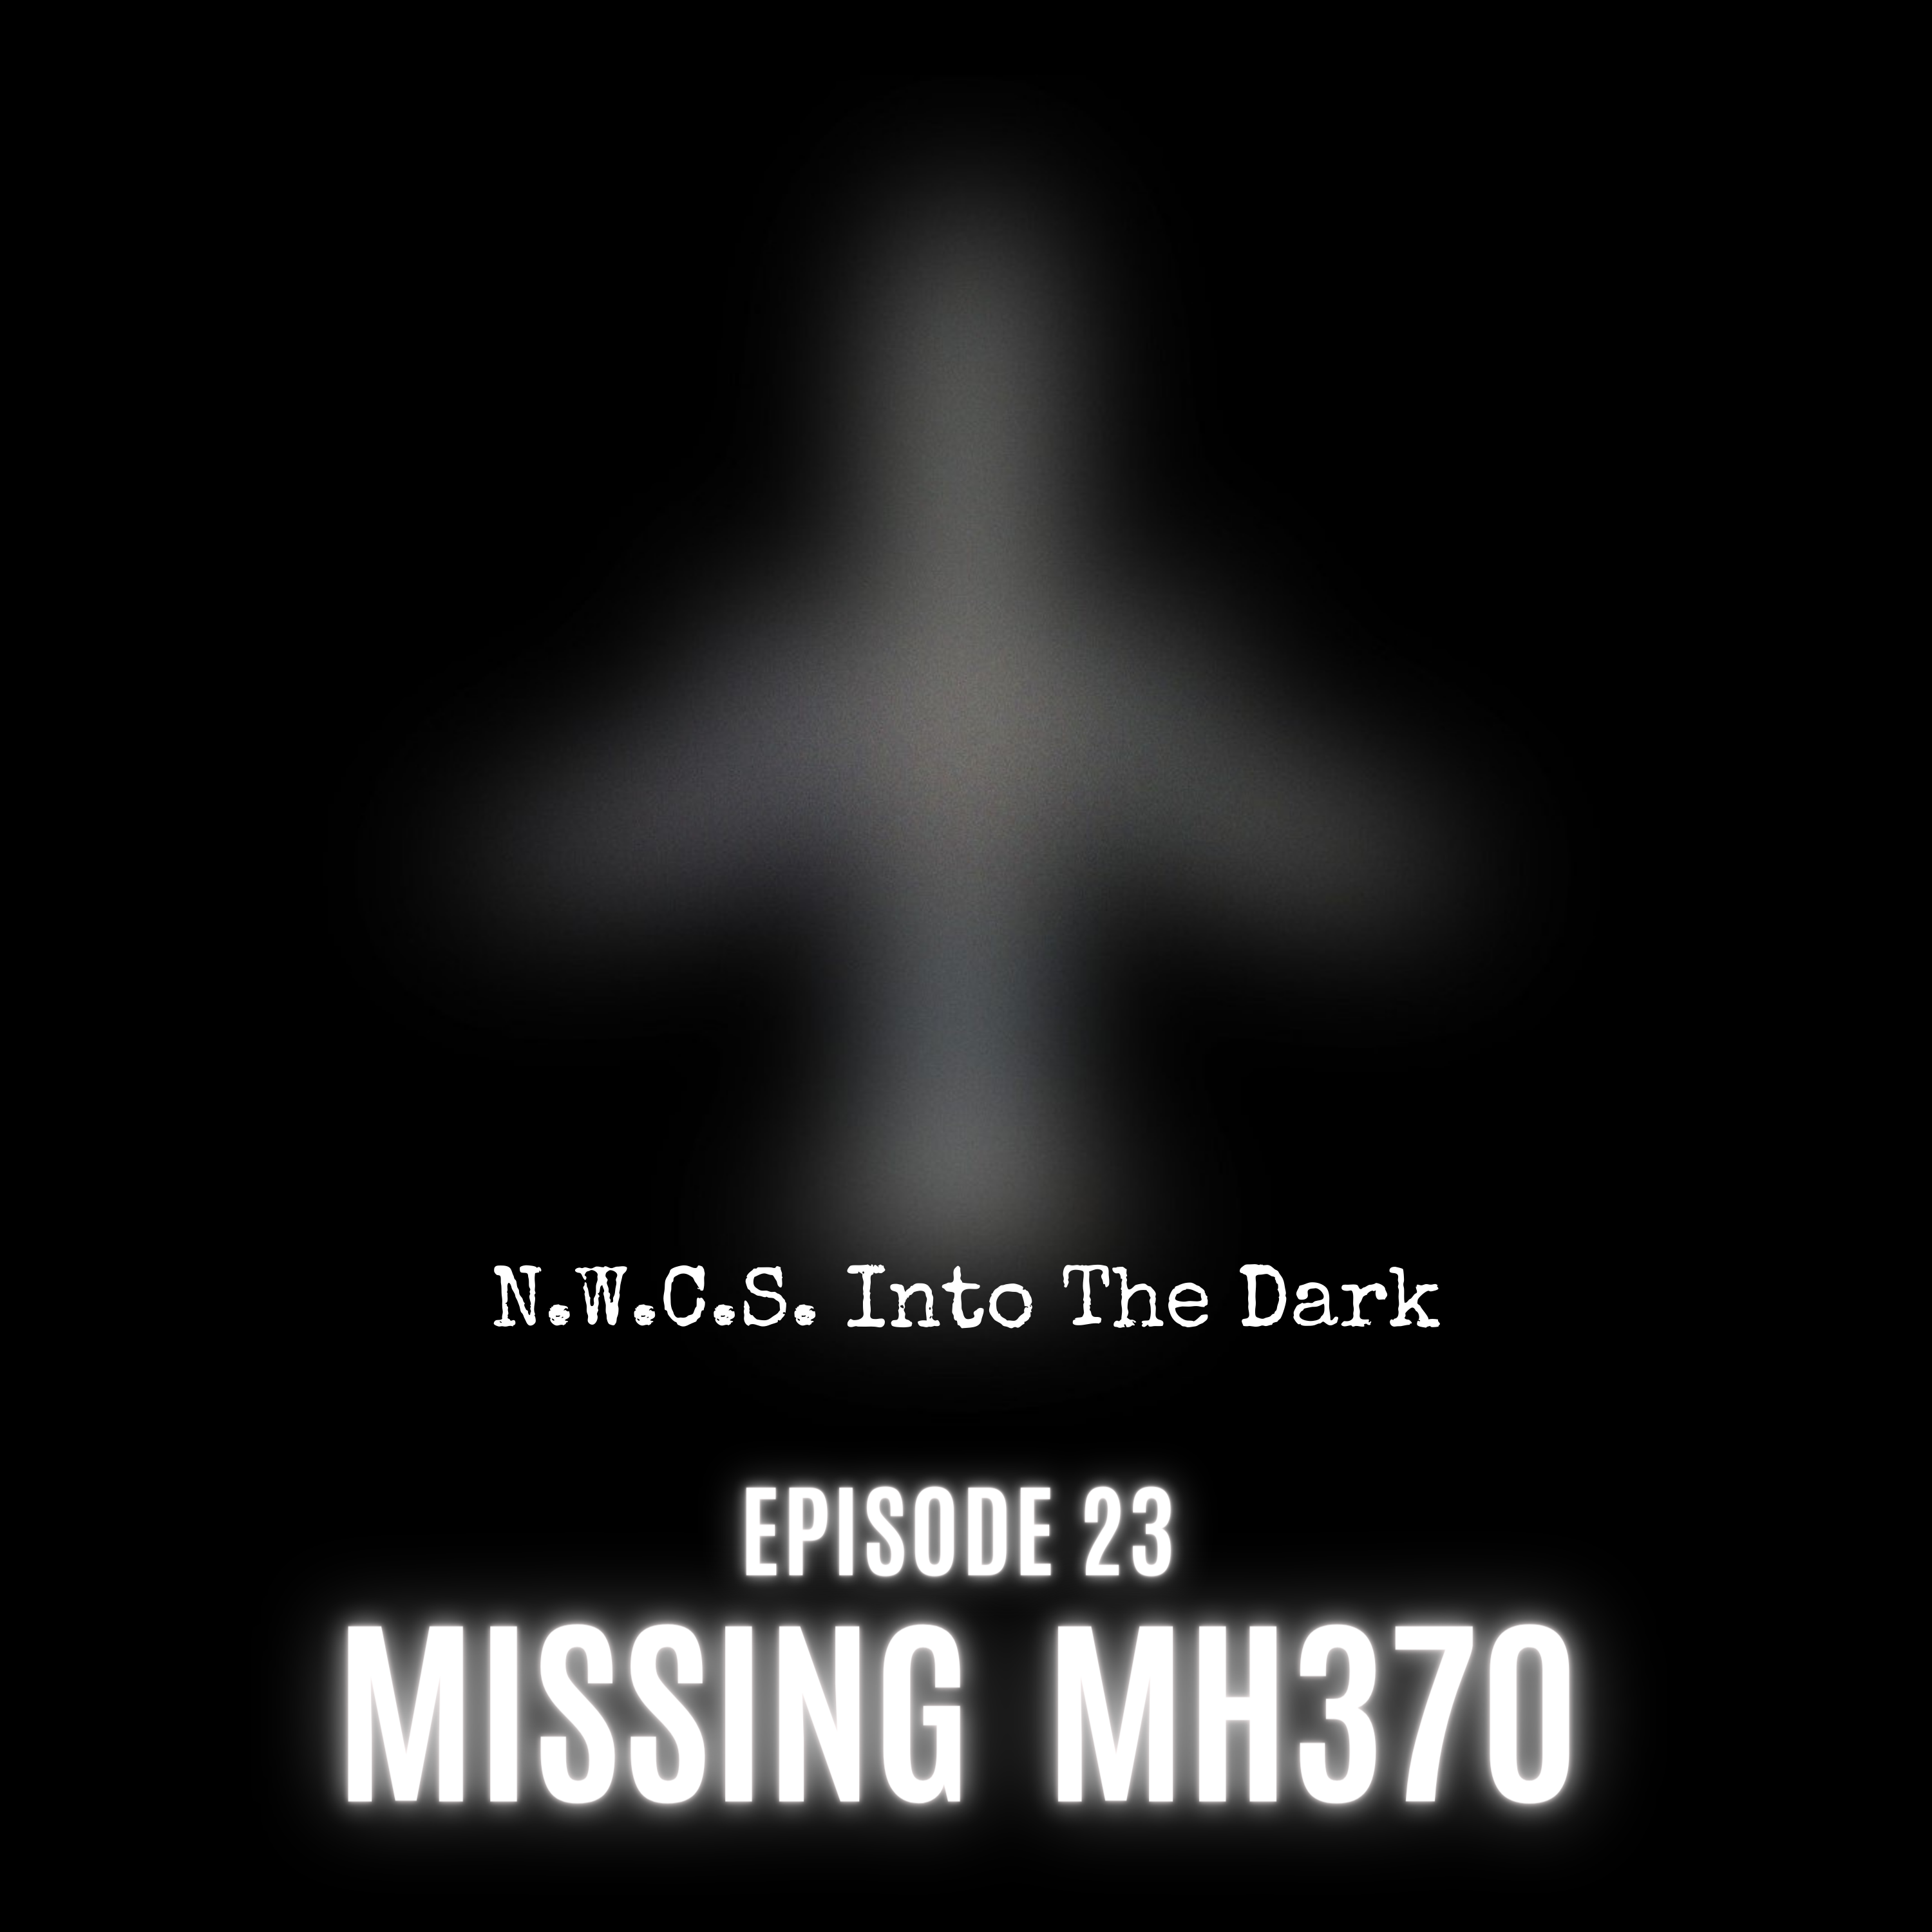 NWCS - Into The Dark Episode 23 Missing Malaysian Flight 370